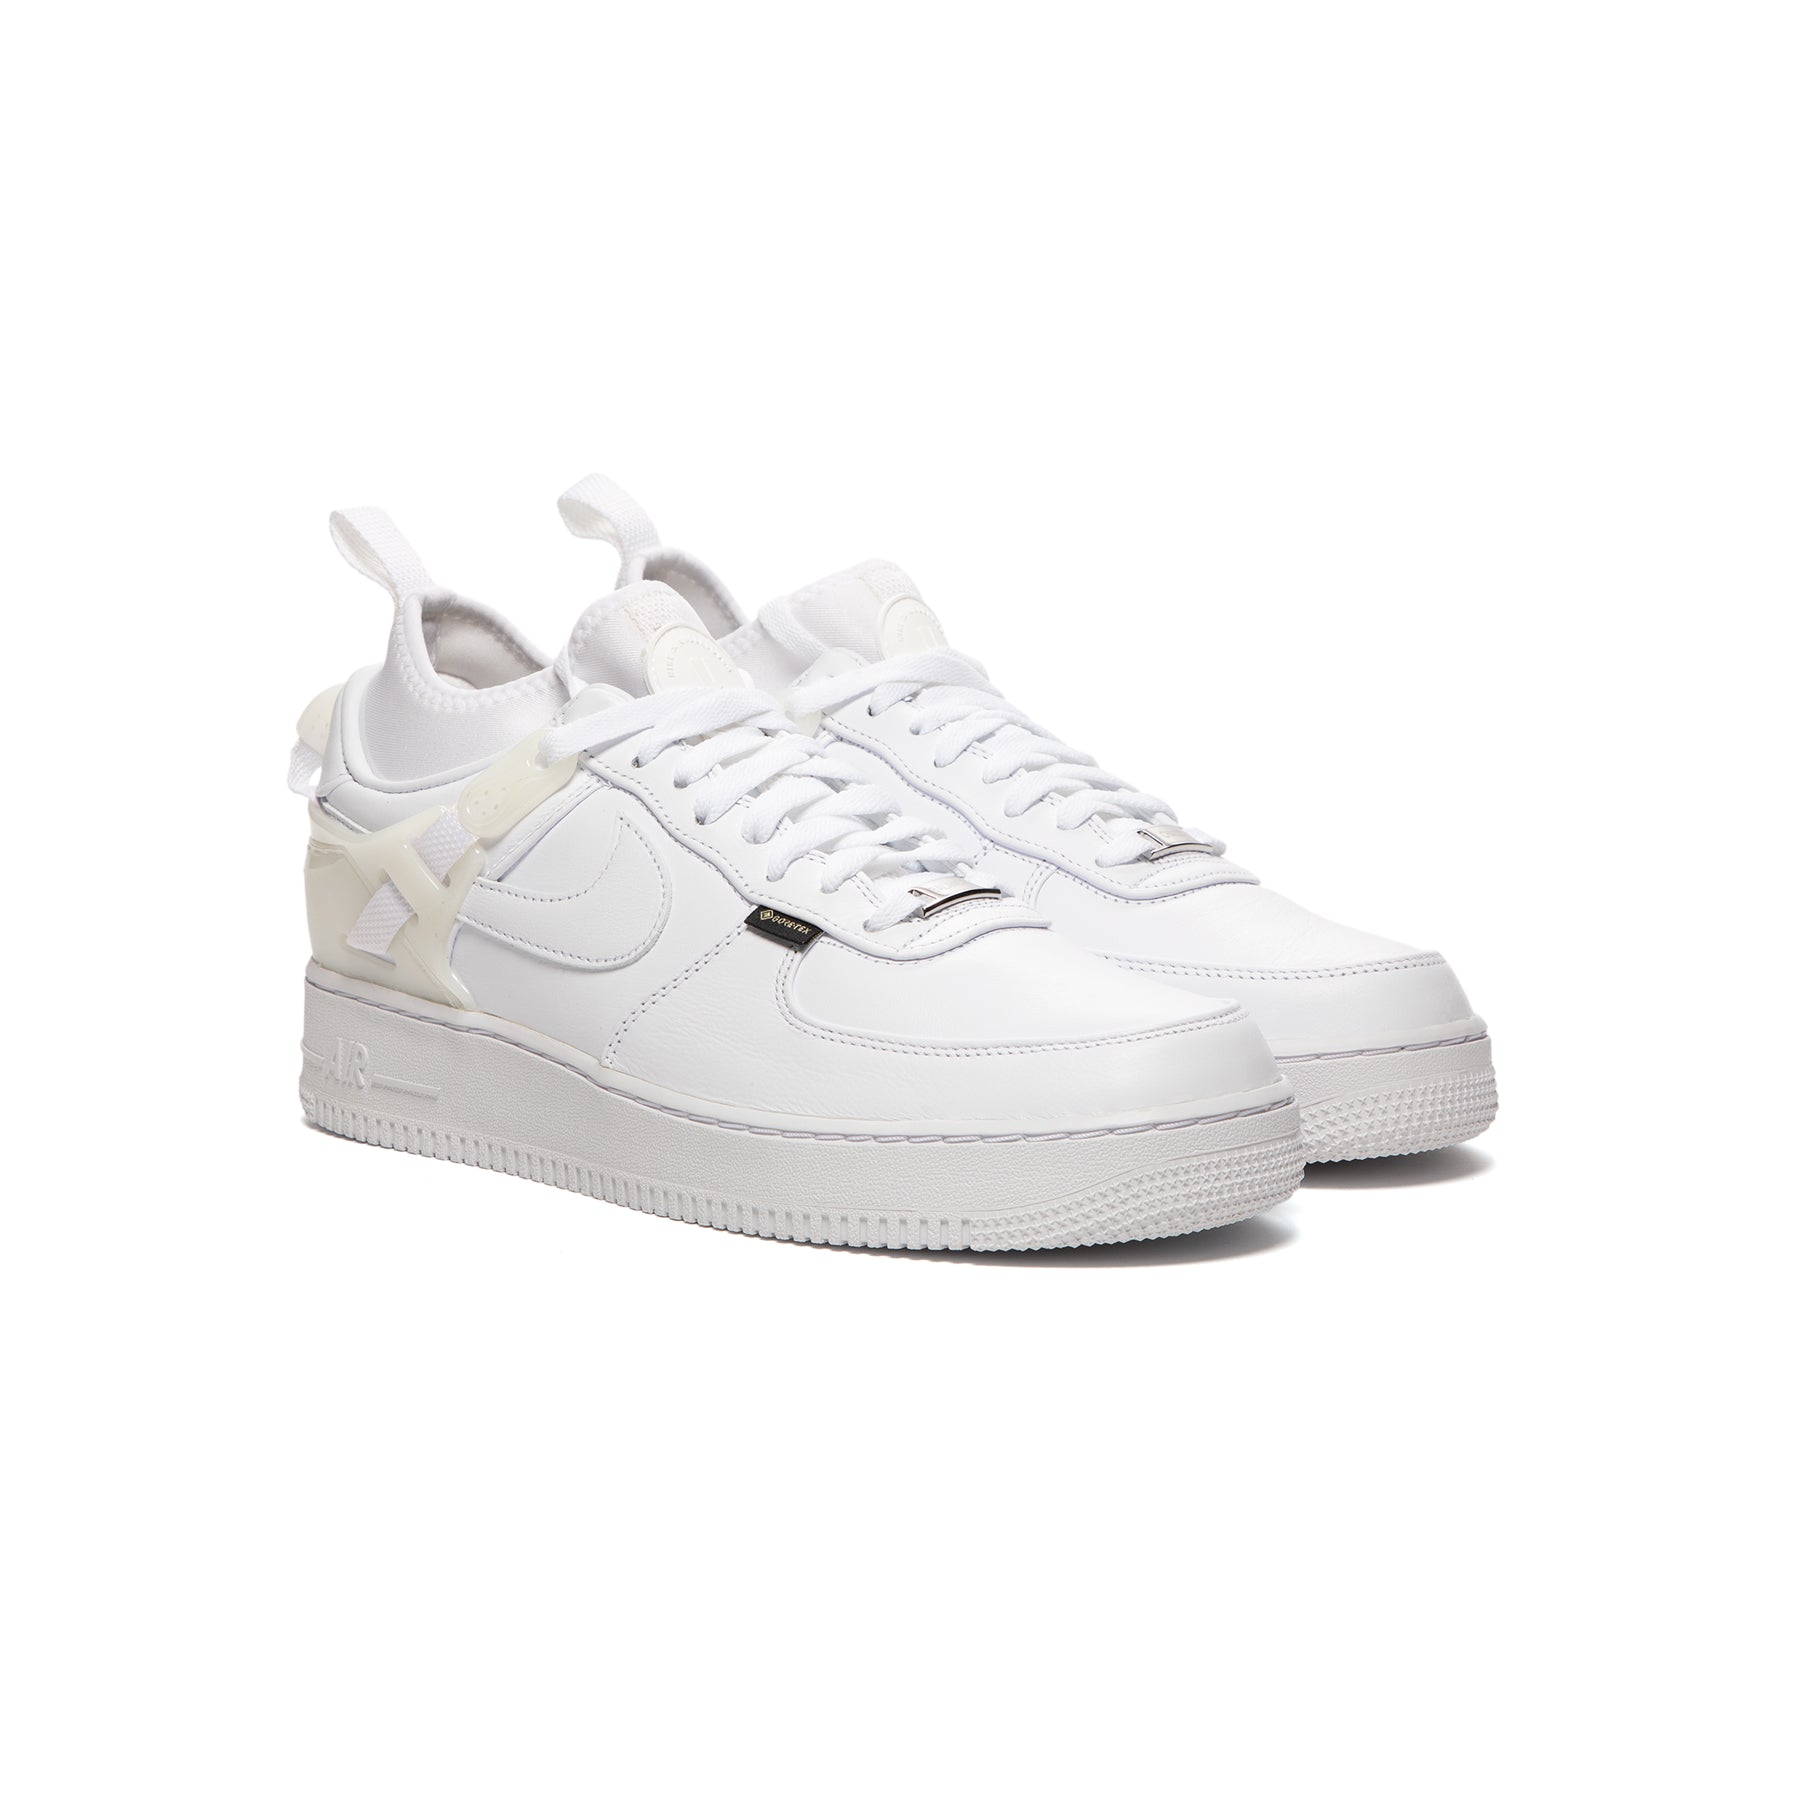 Nike x Undercover Air Force 1 Low SP - White / Sail 11.5